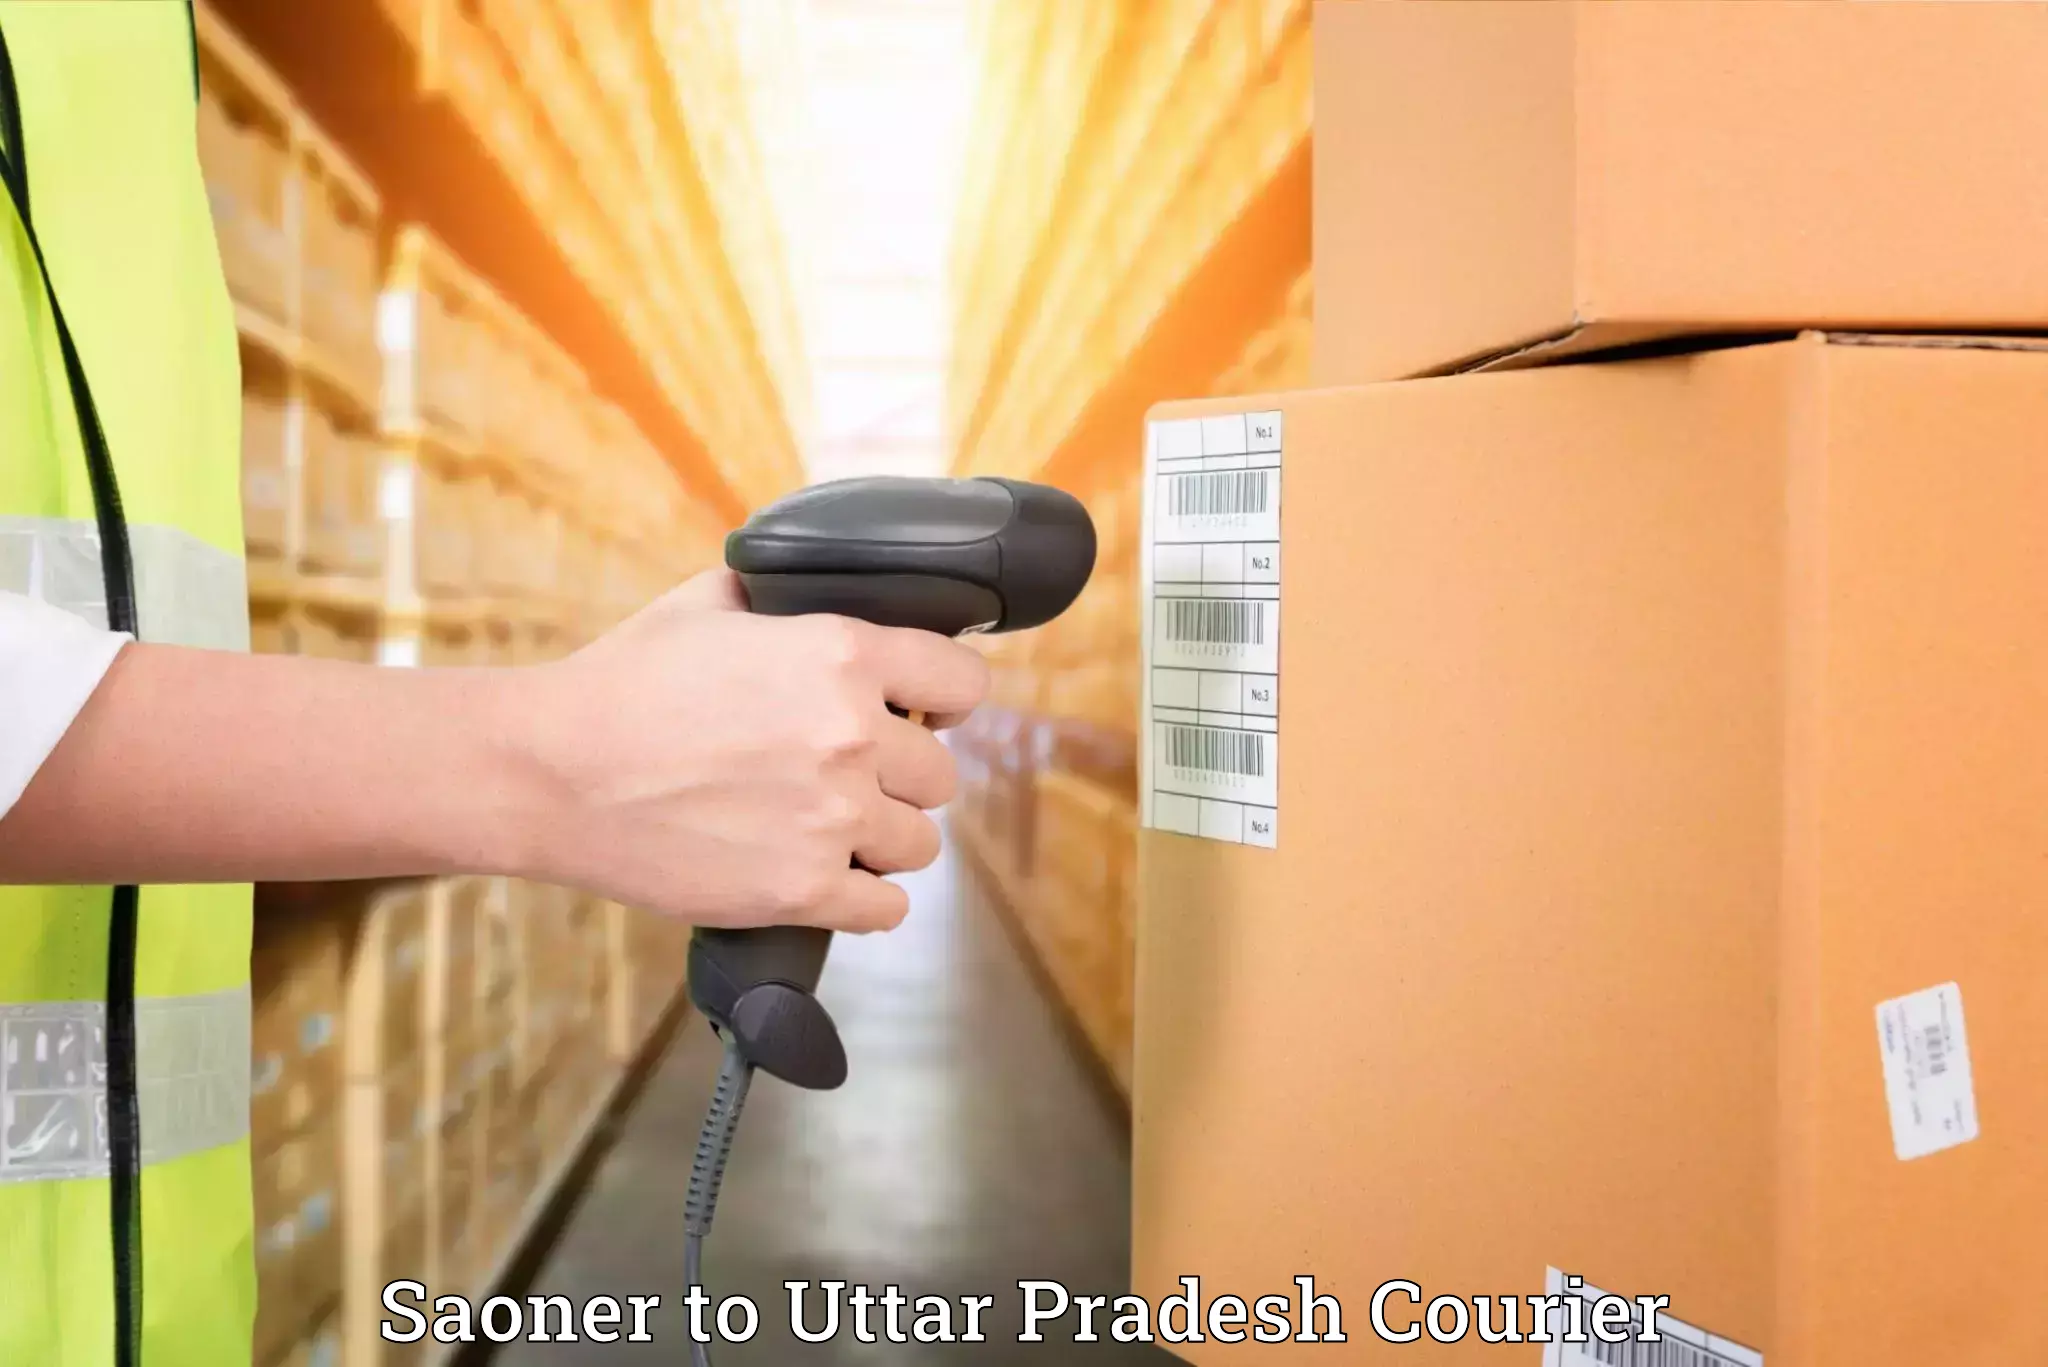 Personalized relocation plans in Saoner to Uttar Pradesh